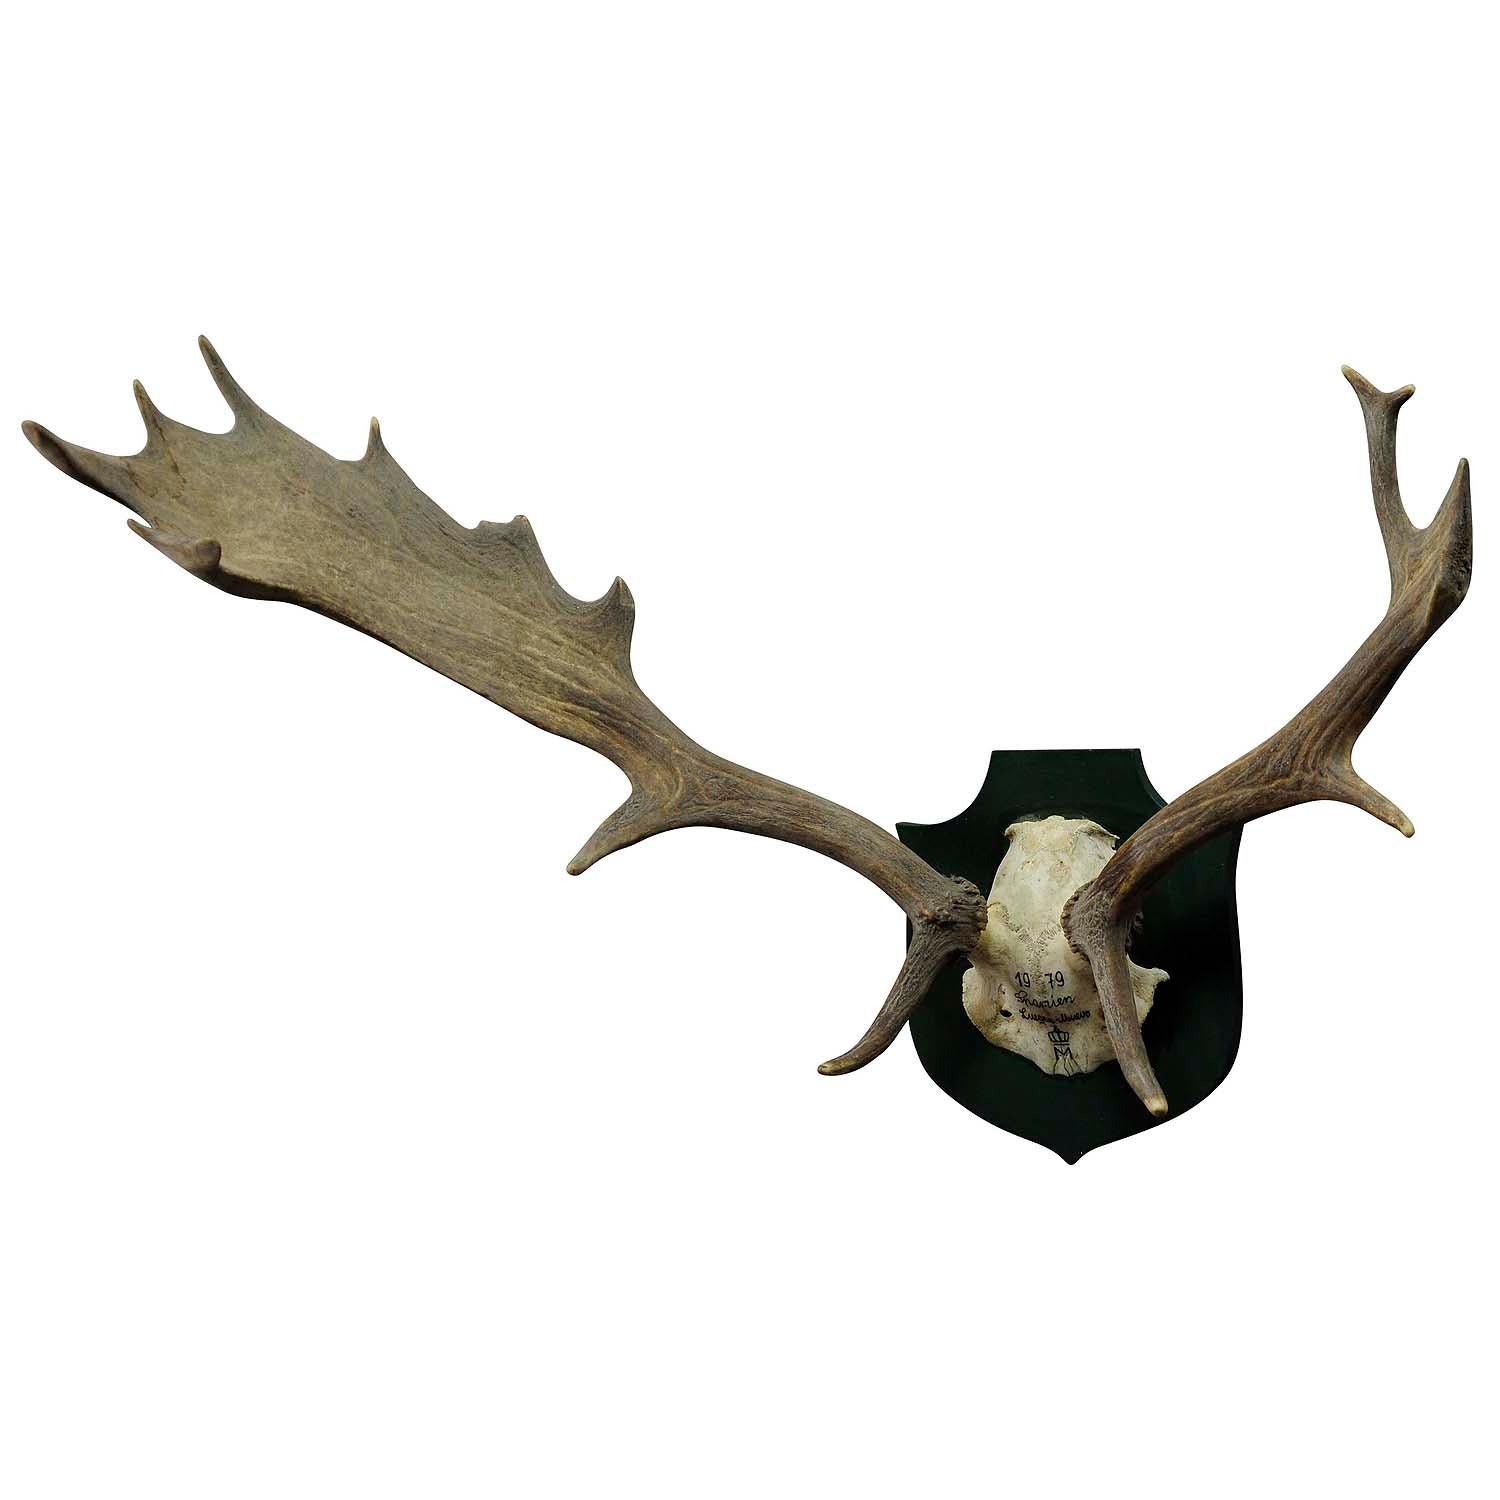 Black Forest Fallow deer Trophy from Salem - Spain 1979

A great abnormal Black Forest fallow deer (Dama dama) trophy from the palace of Salem in South Germany. It was shot in Spain by a member of the lordly family of Baden in 1979. The handwritten